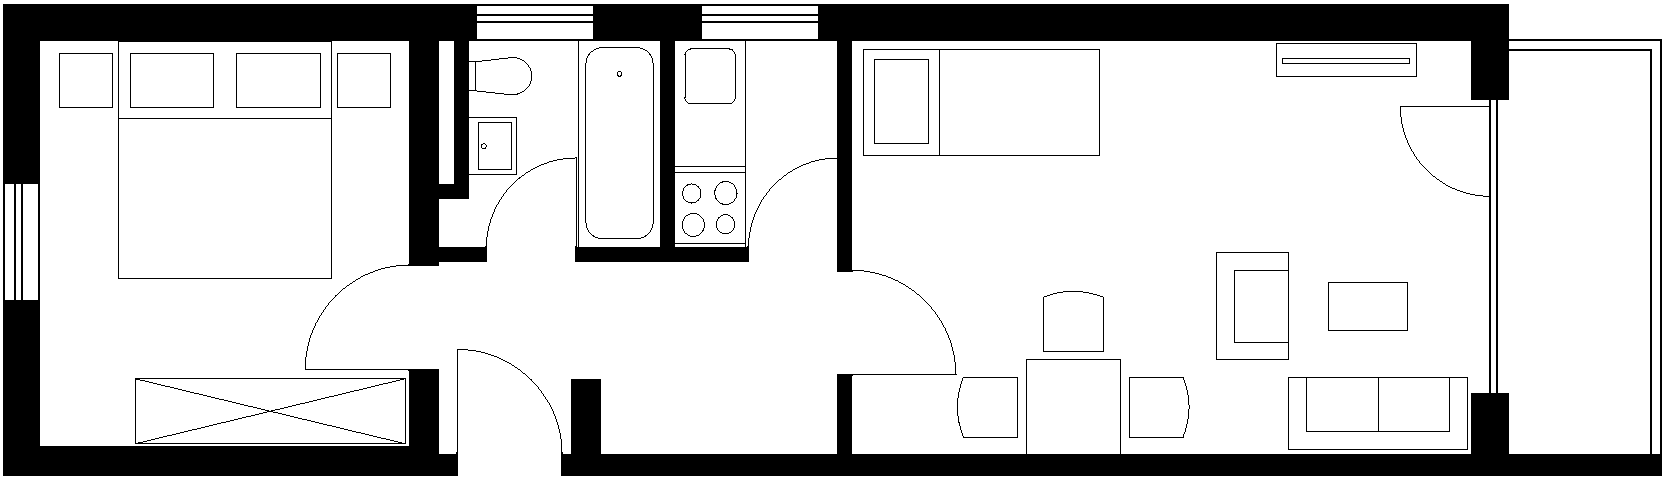 Floor plan of our holiday apartment type A3